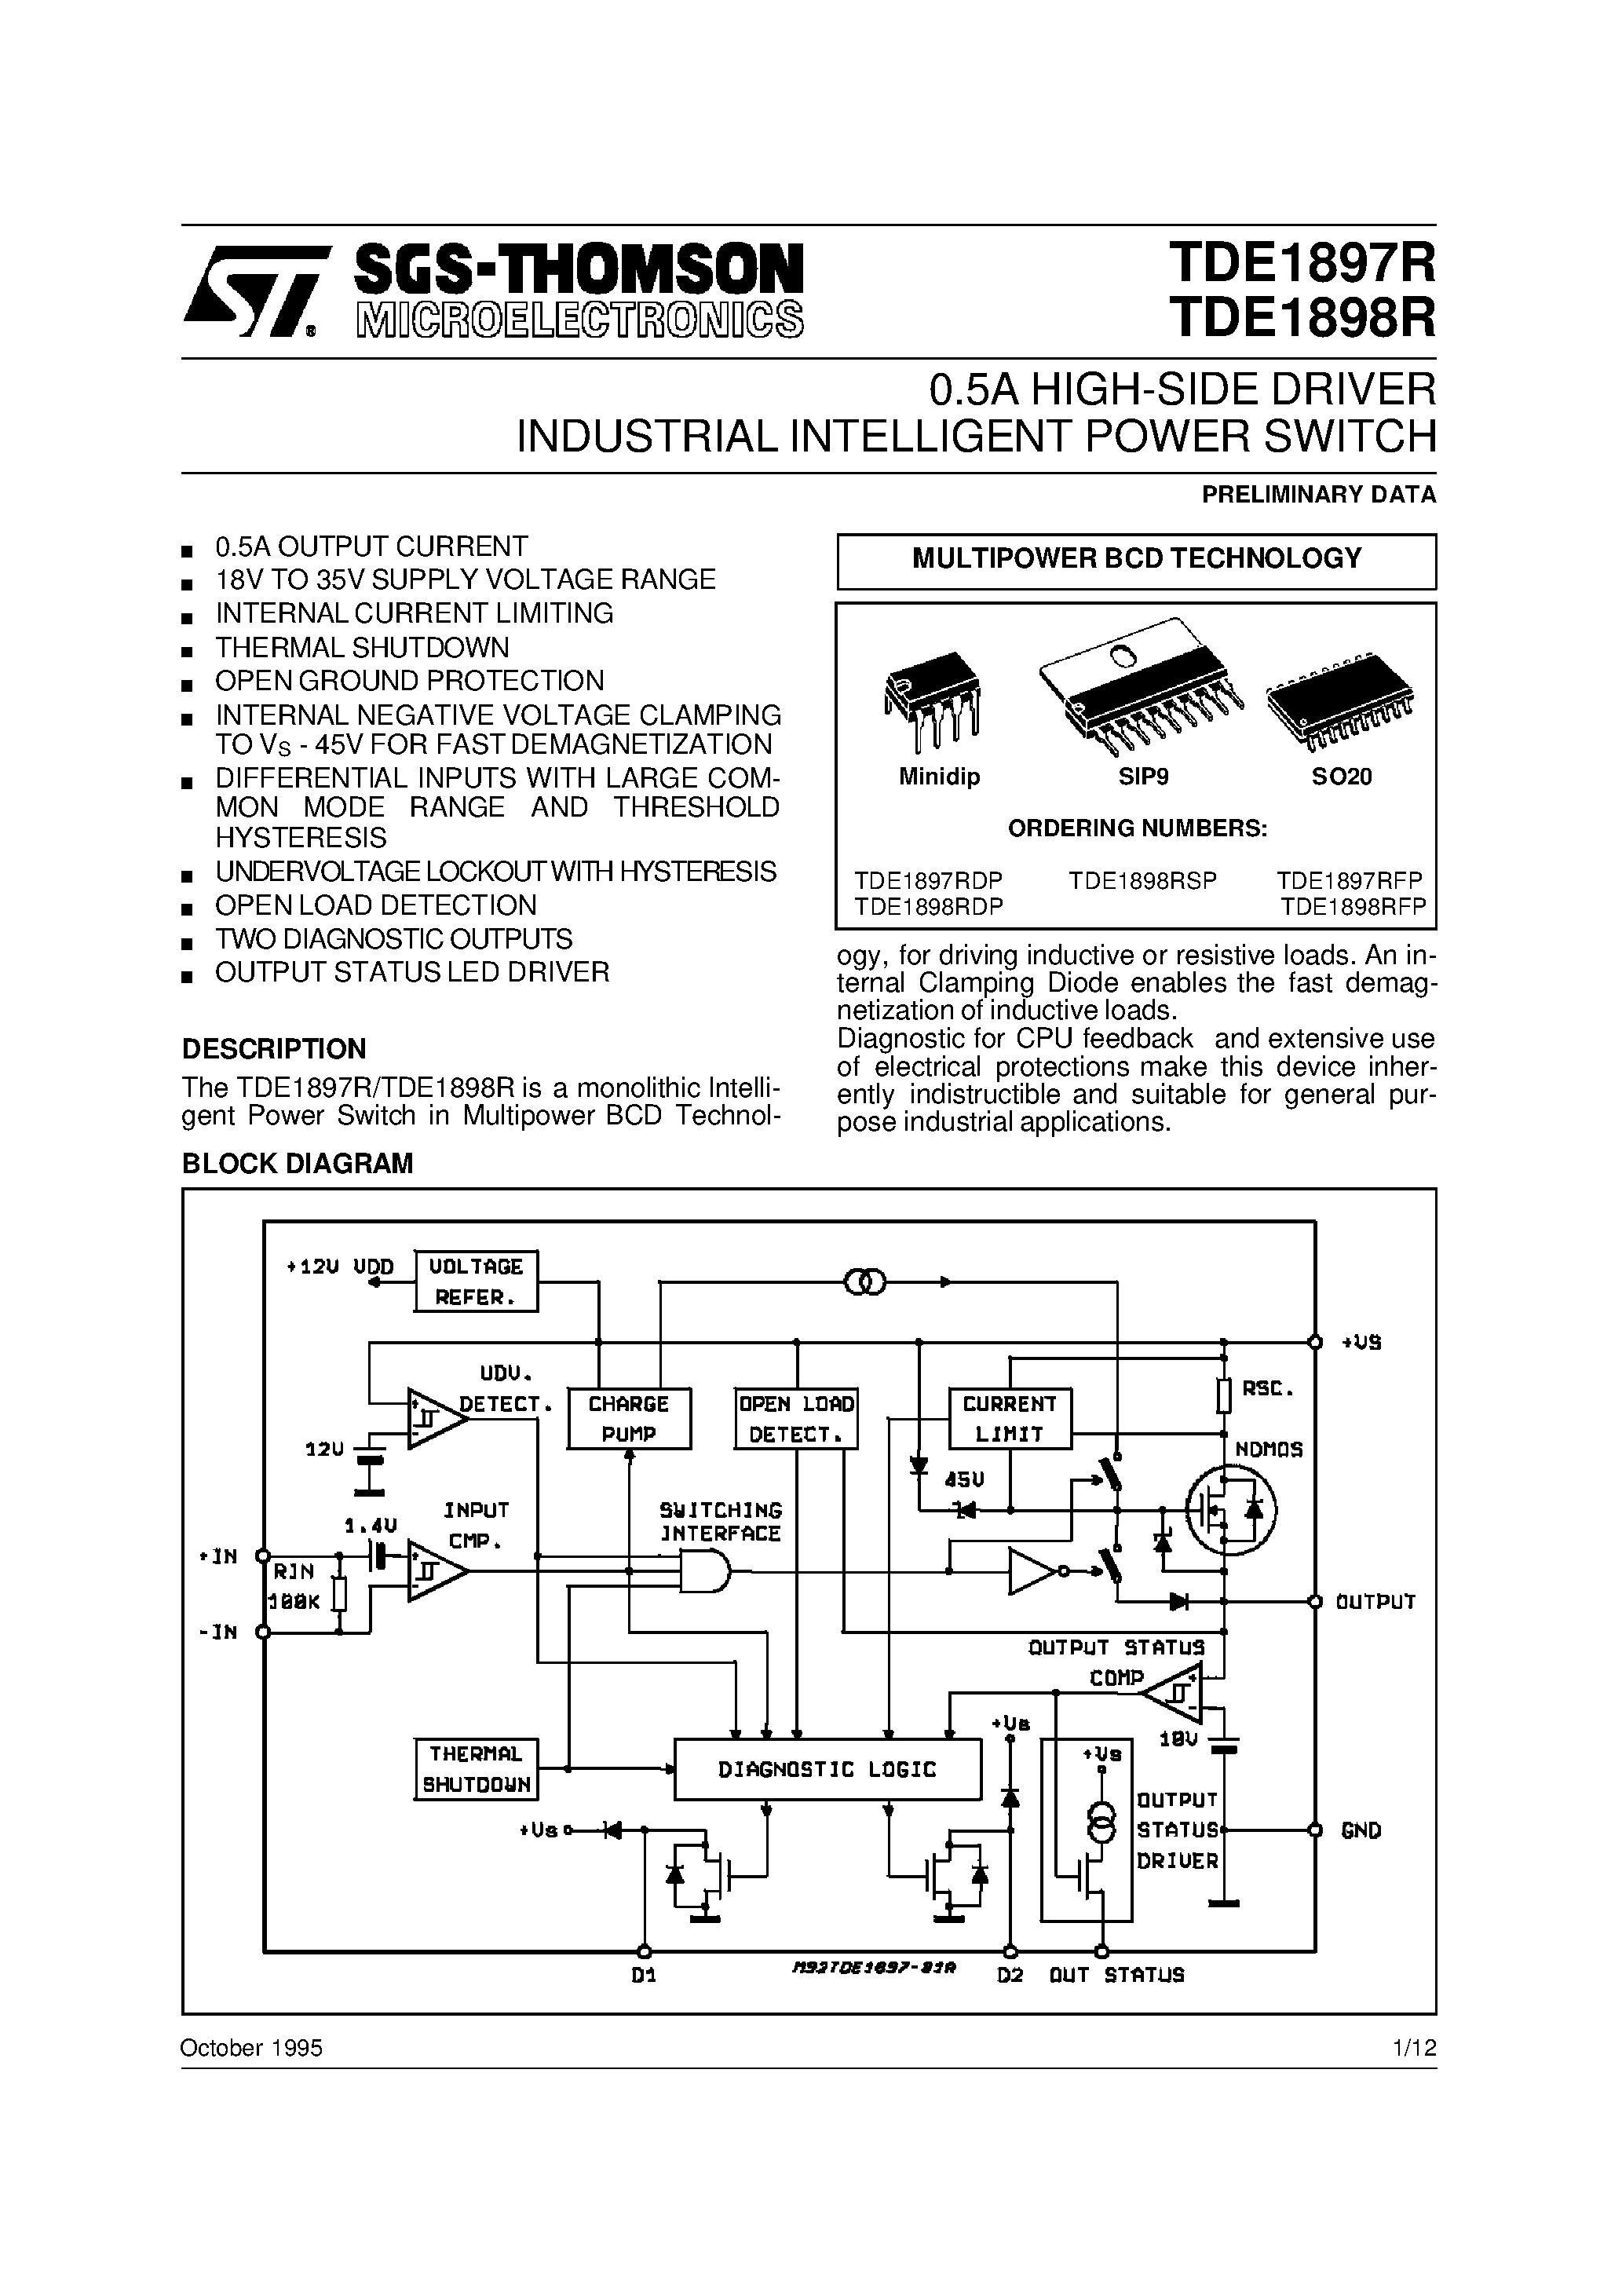 Datasheet TDE1897RDP - 0.5A HIGH-SIDE DRIVER INDUSTRIAL INTELLIGENT POWER SWITCH page 1